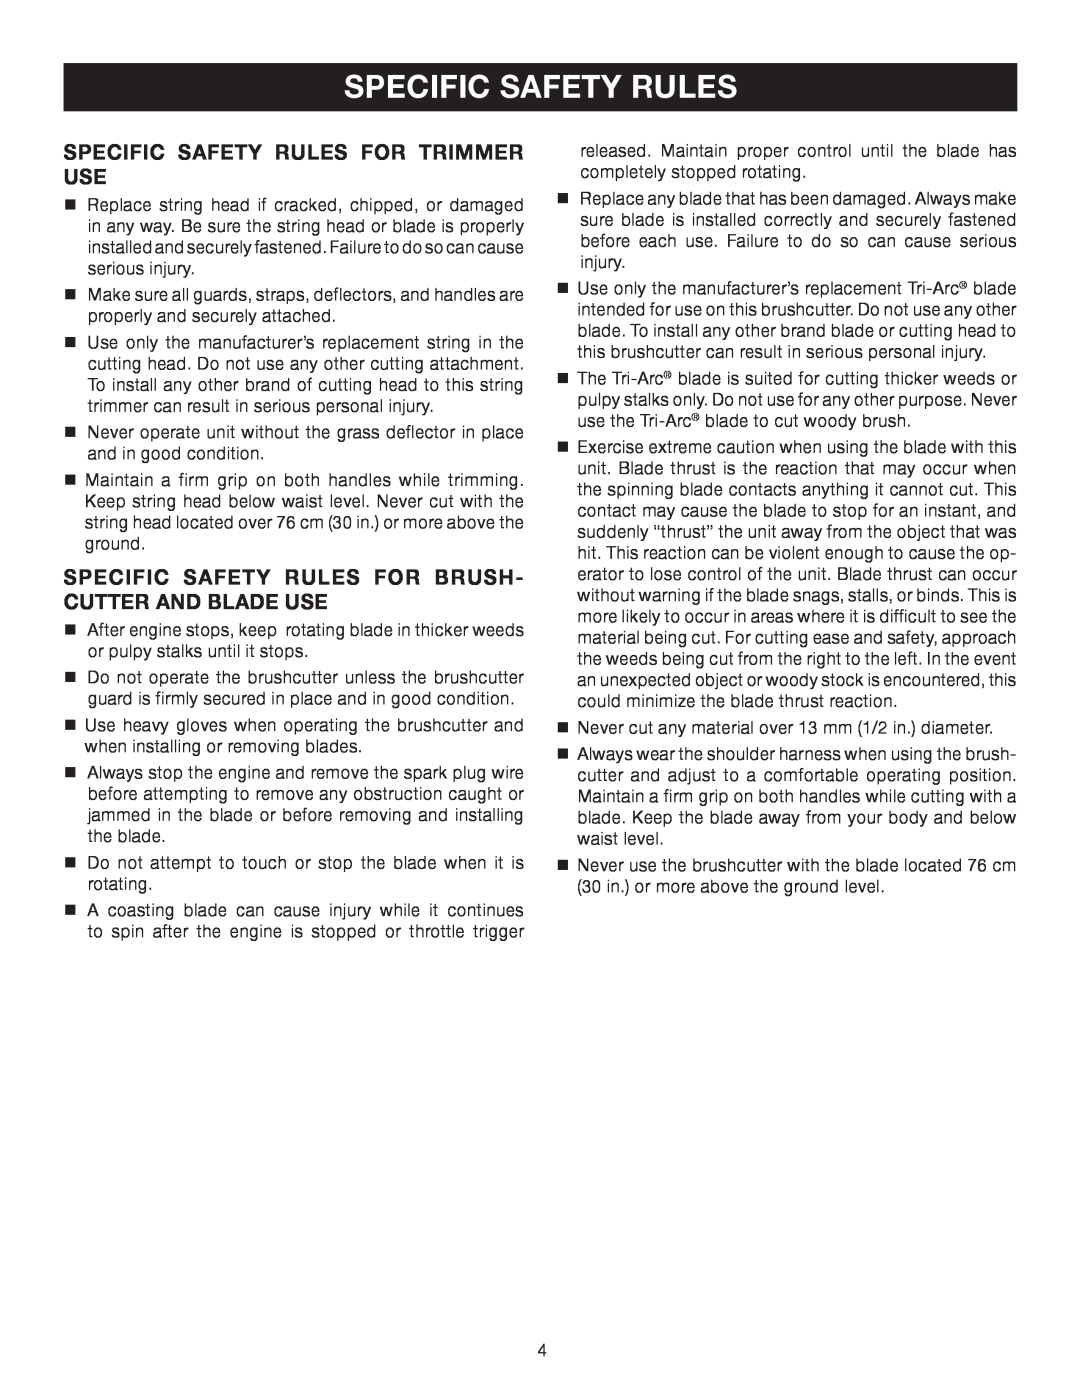 Ryobi CS30 RY30120, BC30 RY30160, SS30 RY30140 manual Specific Safety Rules For Trimmer Use 